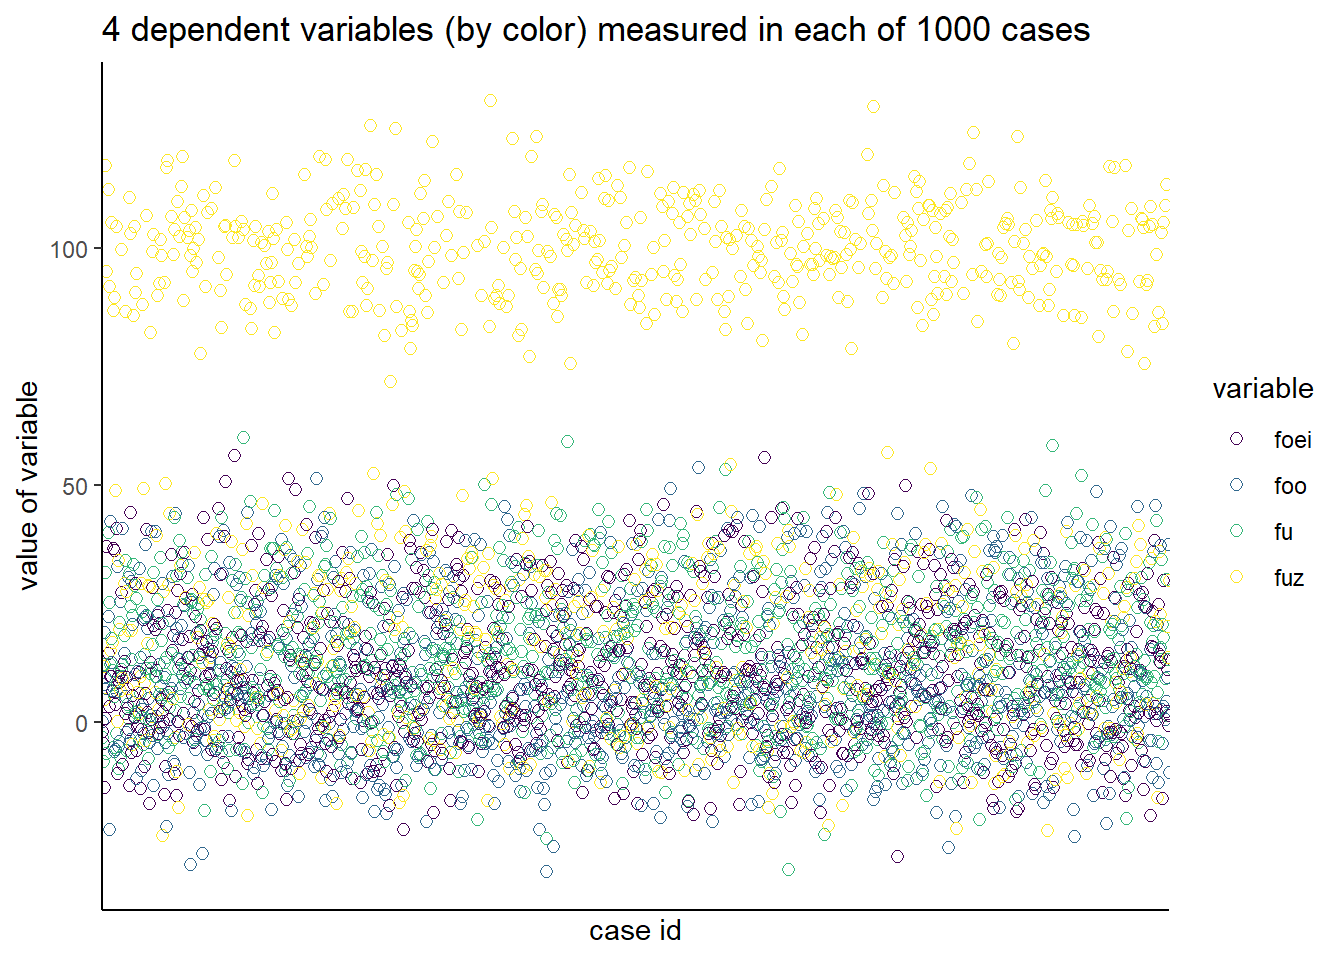 All of the data values plotted.